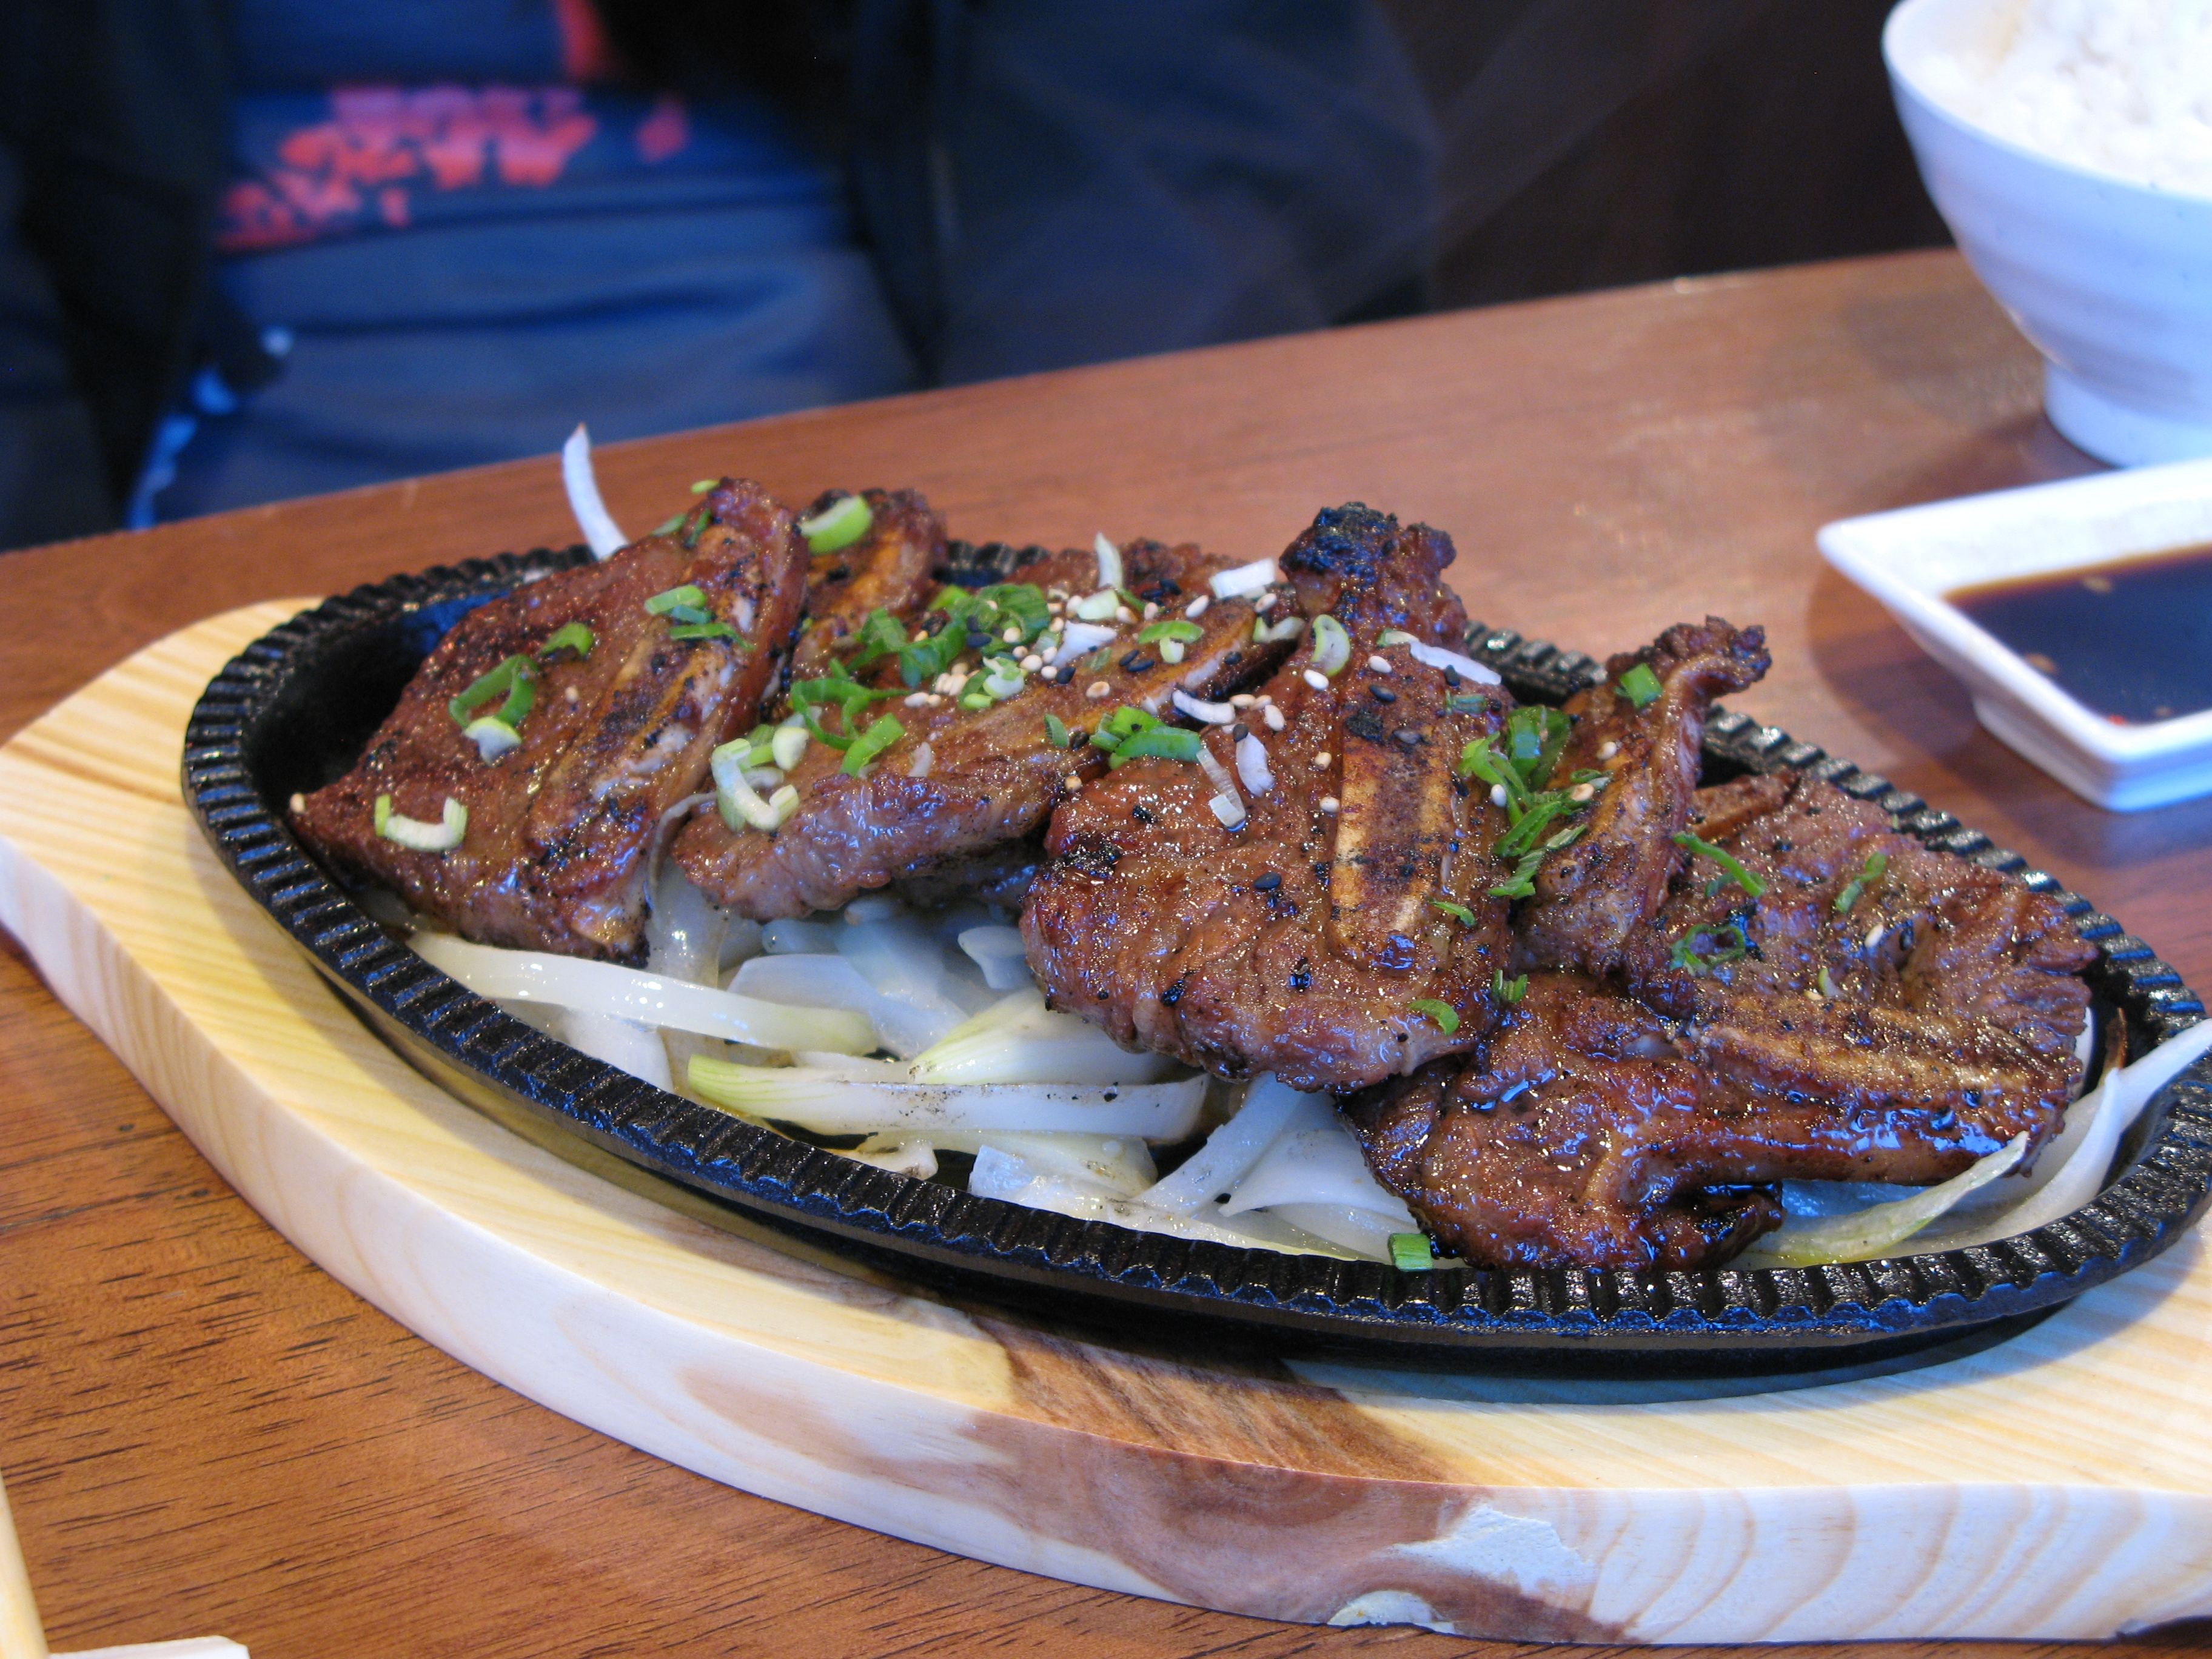 This is the Kalbi for around